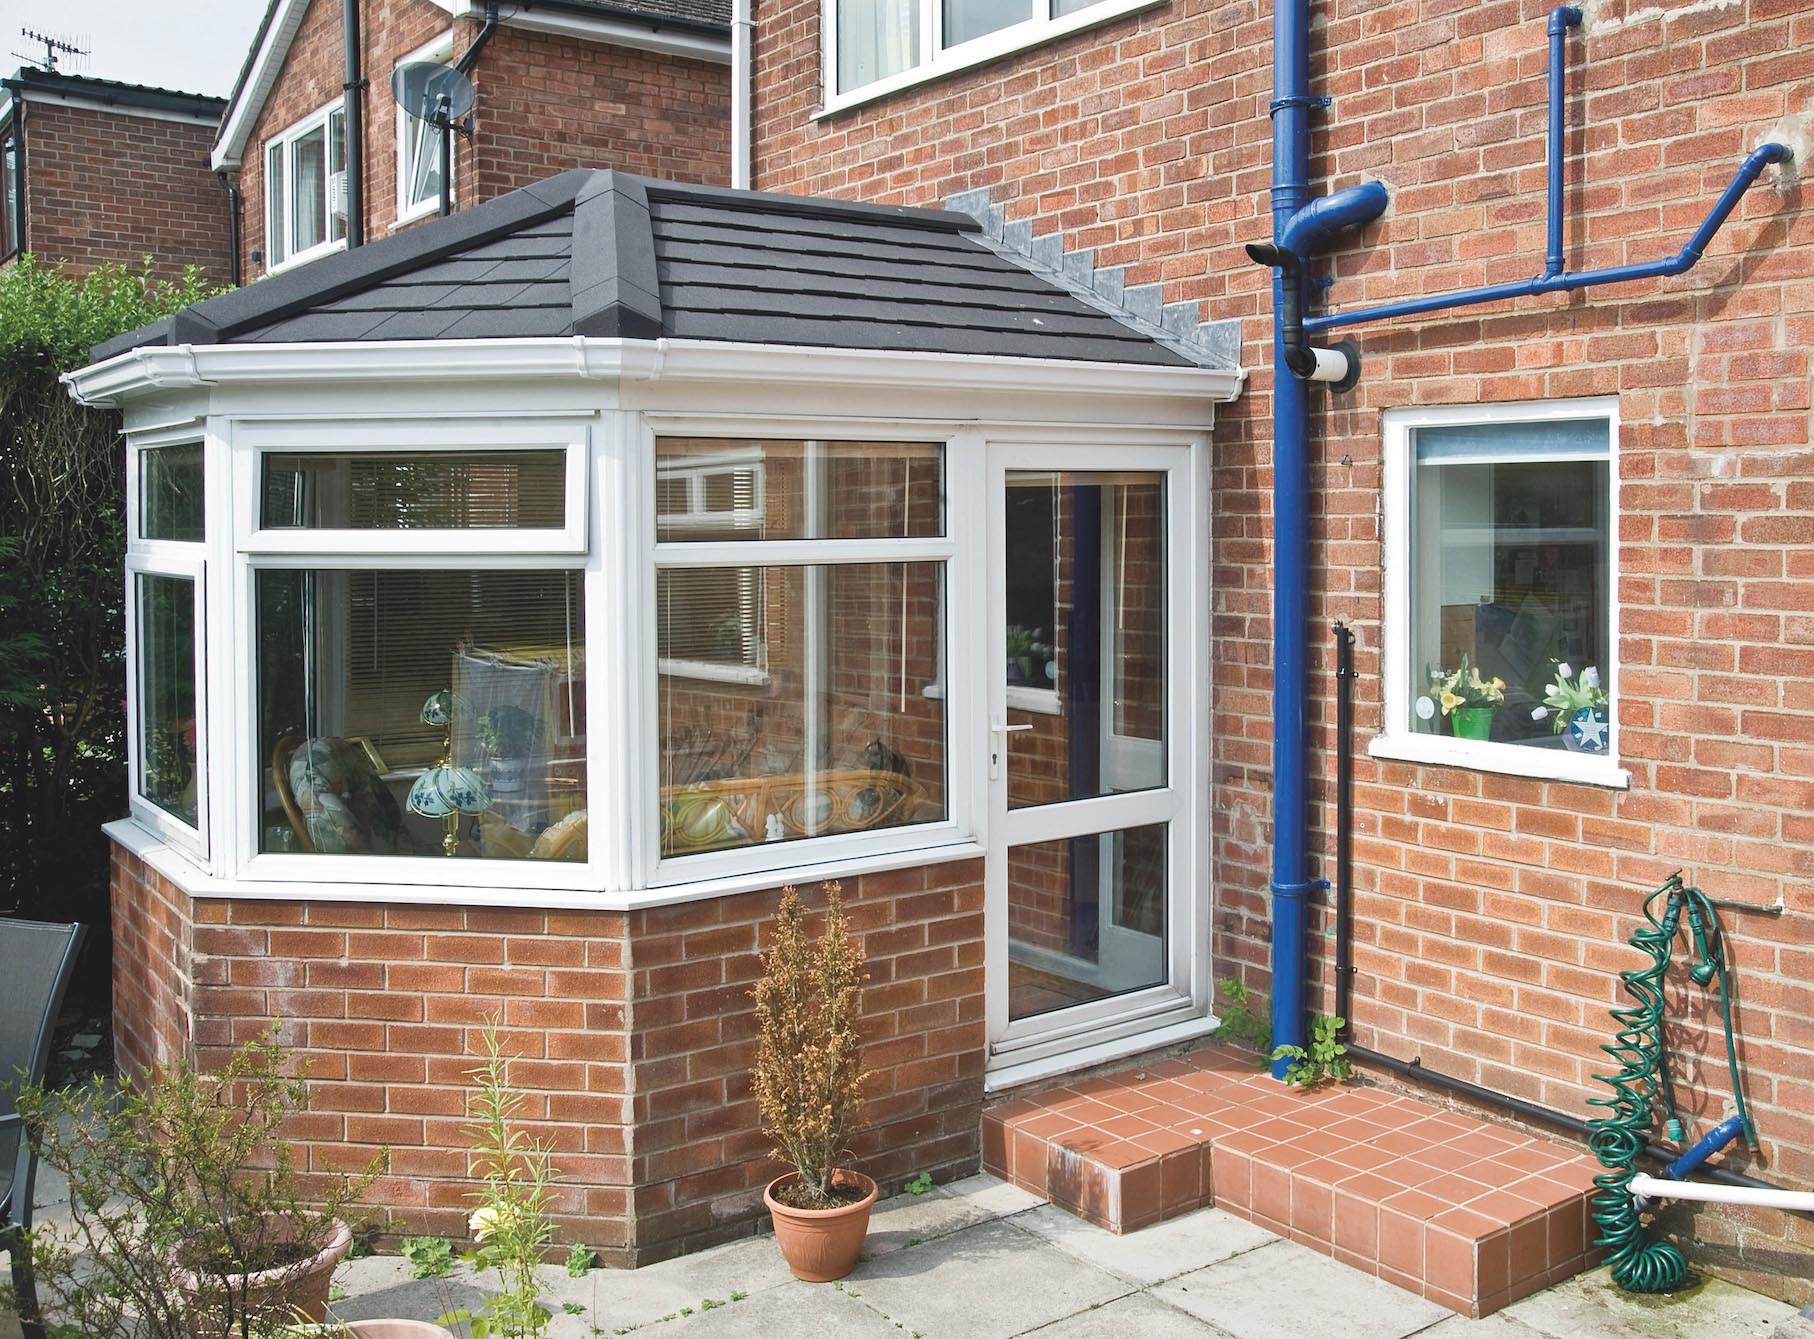 Conservatory refurbished with a Metrotile Lightweight Roof System Shingle Charcoal